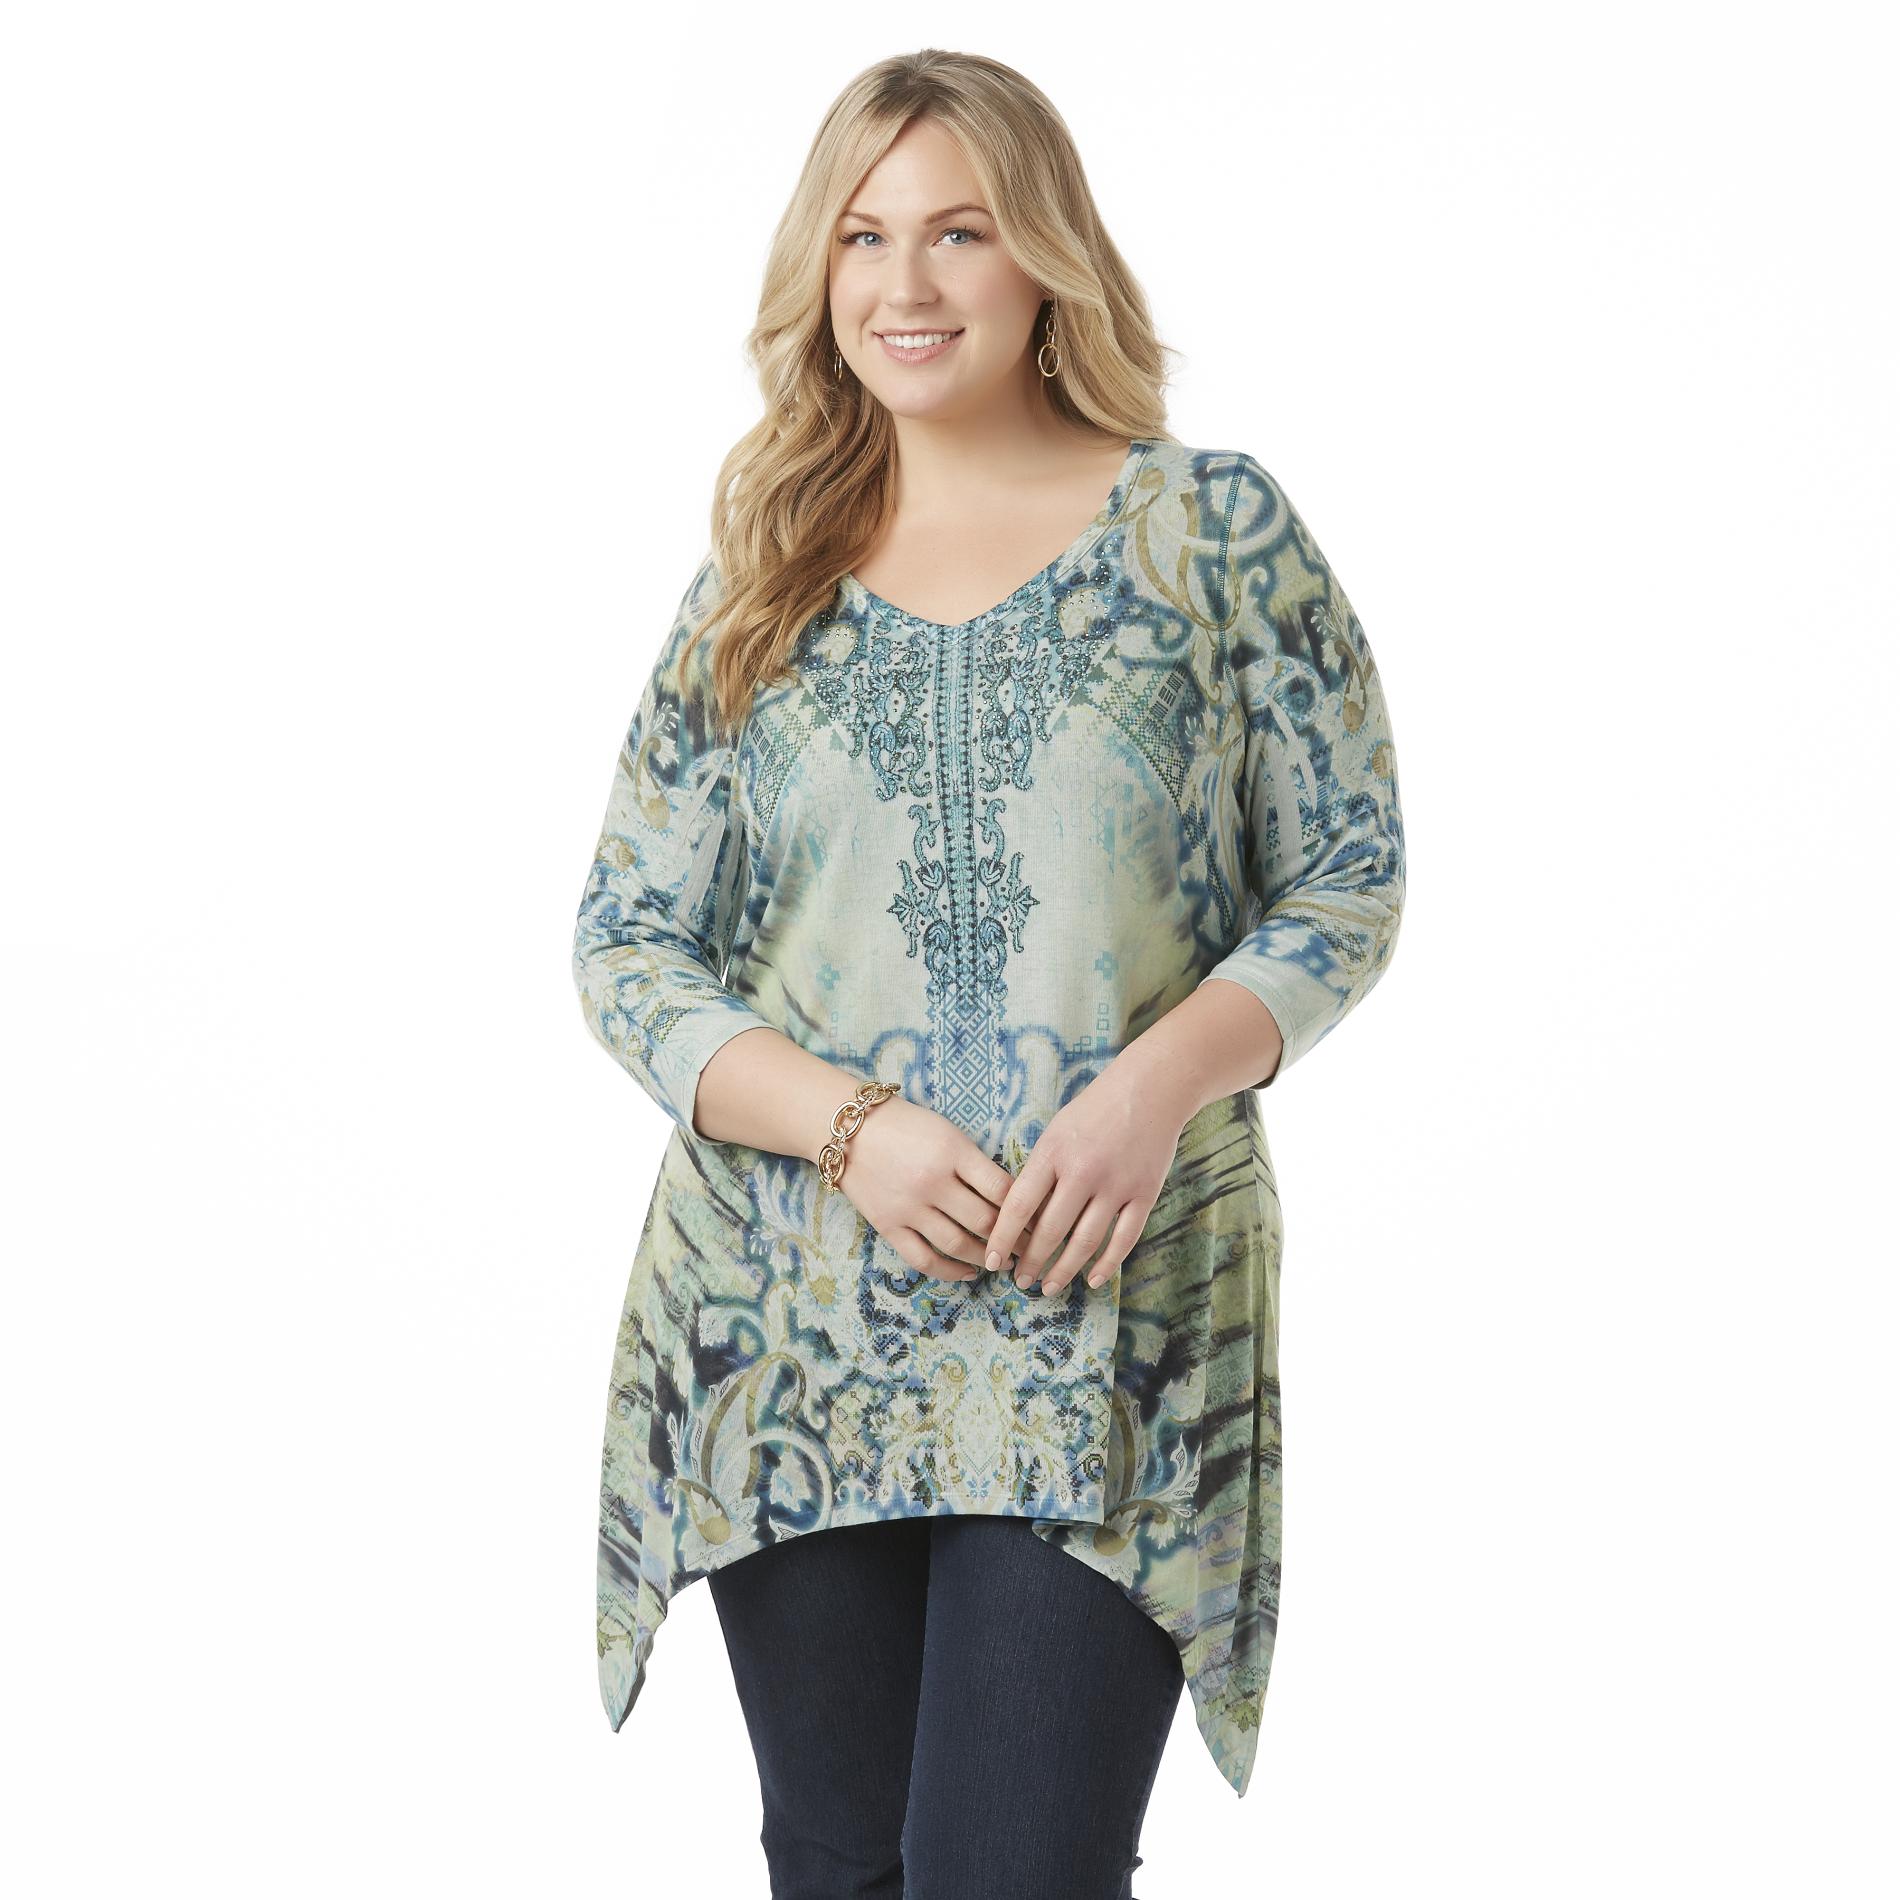 Live and Let Live Women's Plus Embellished Shirt - Paisley